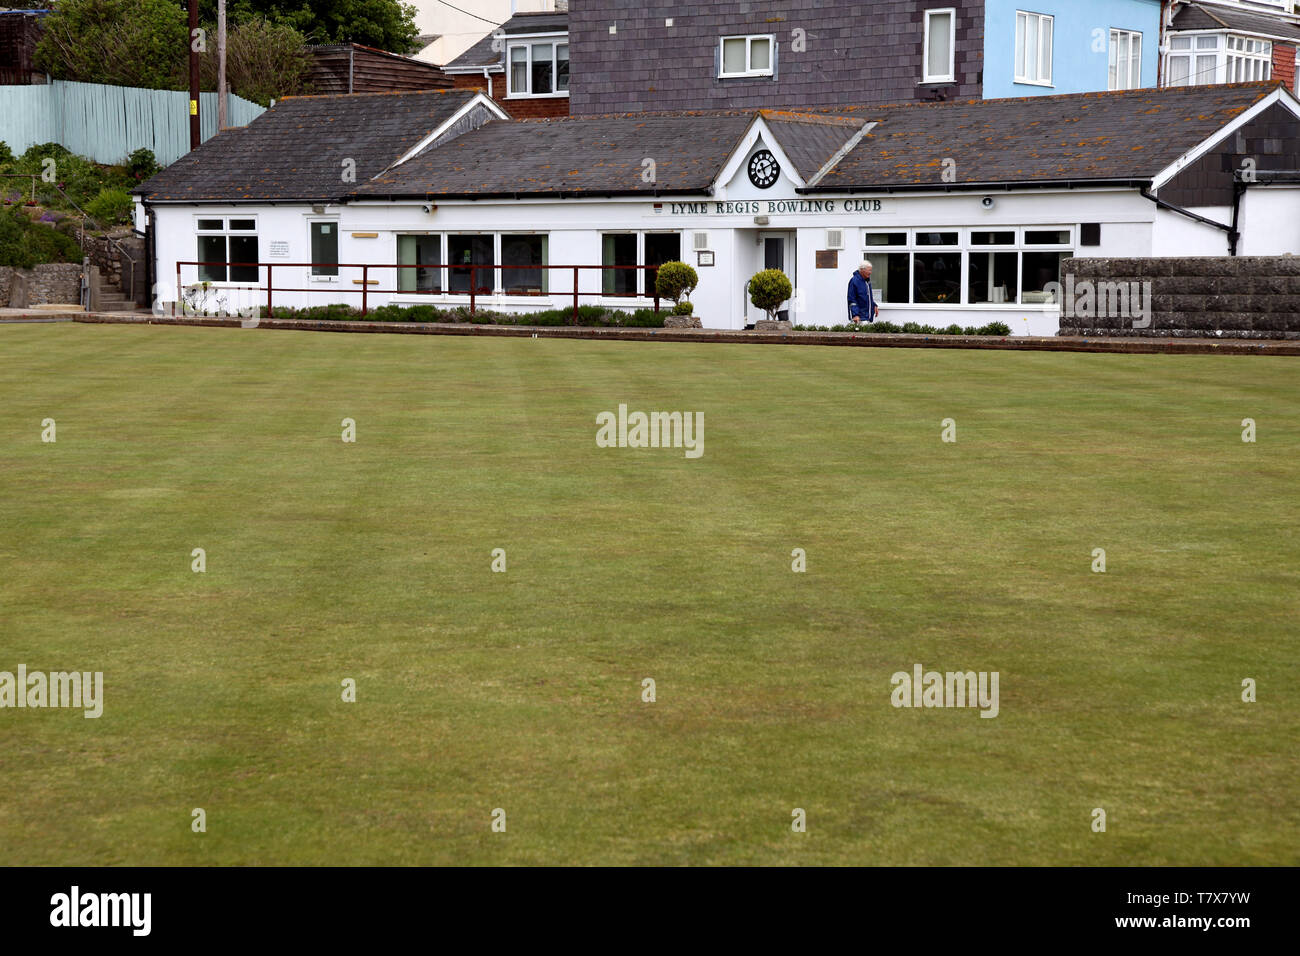 Lyme Regis Bowling Club, Dorset, clubhouse viewed across lawn, 2019 with copy space Stock Photo